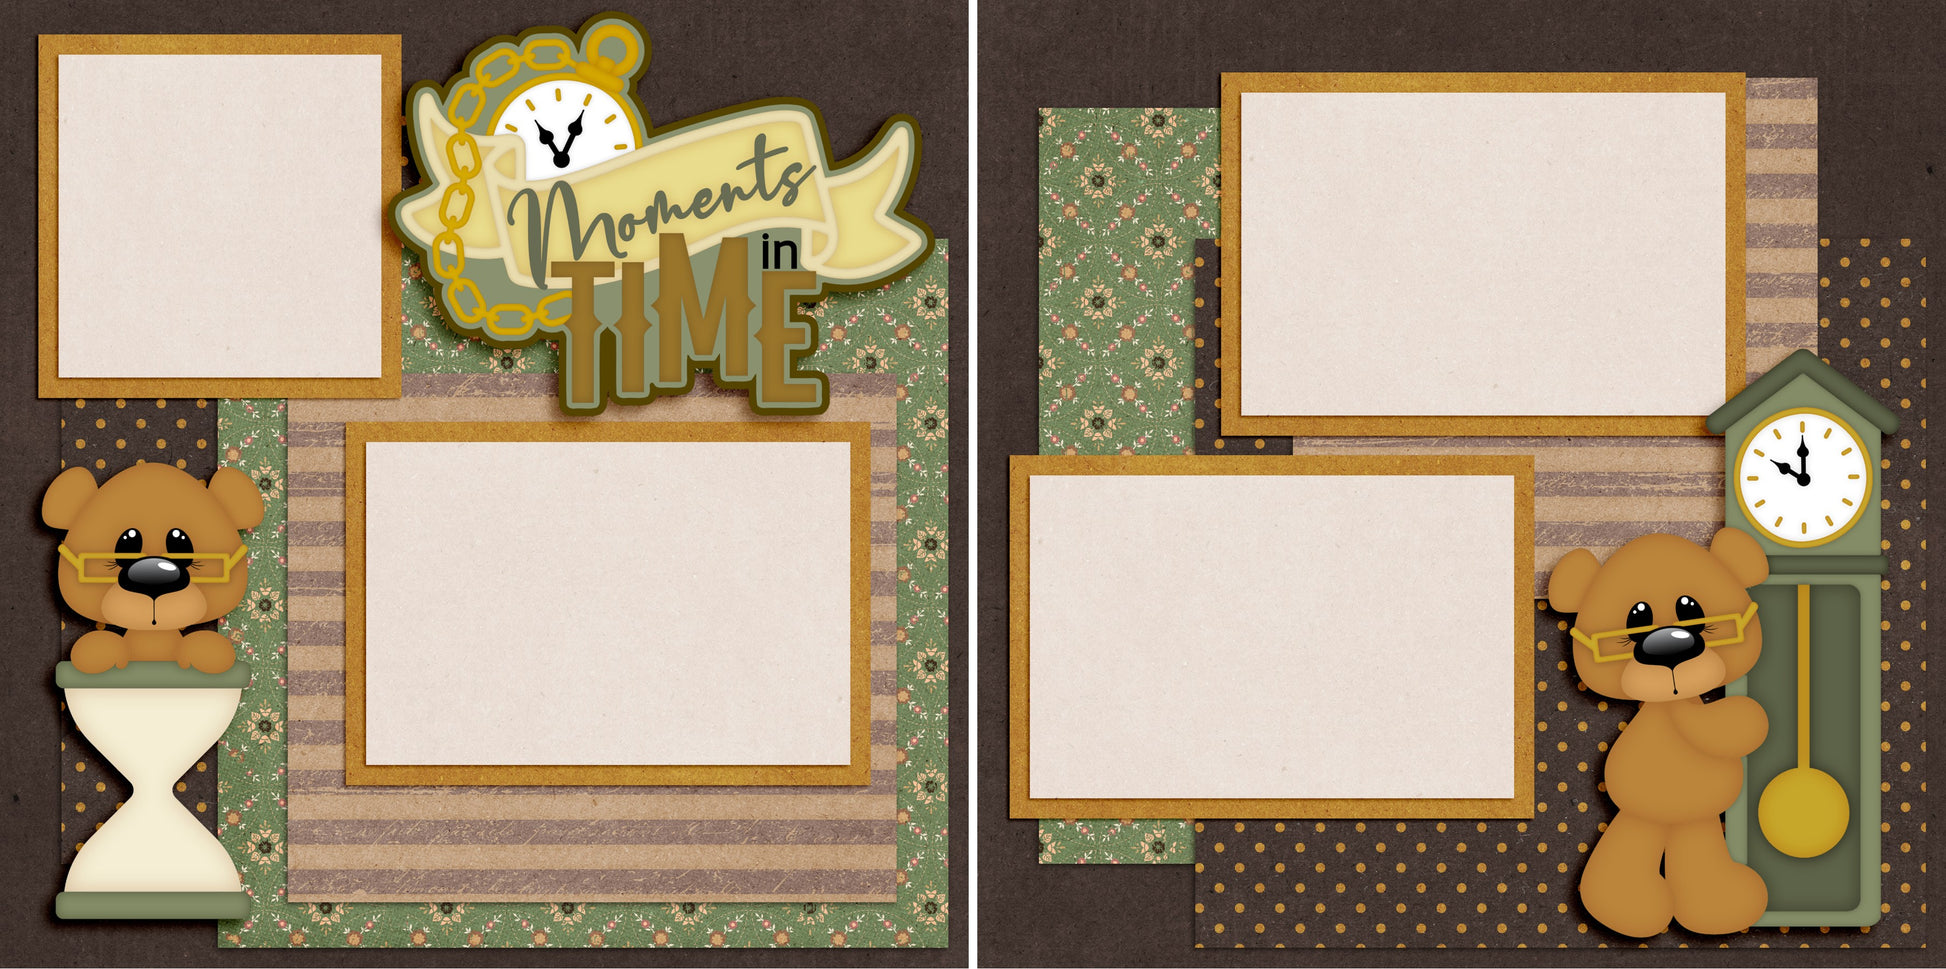 Moments in Time - 4762 - EZscrapbooks Scrapbook Layouts Family, Grandfather, Grandmother, Heritage